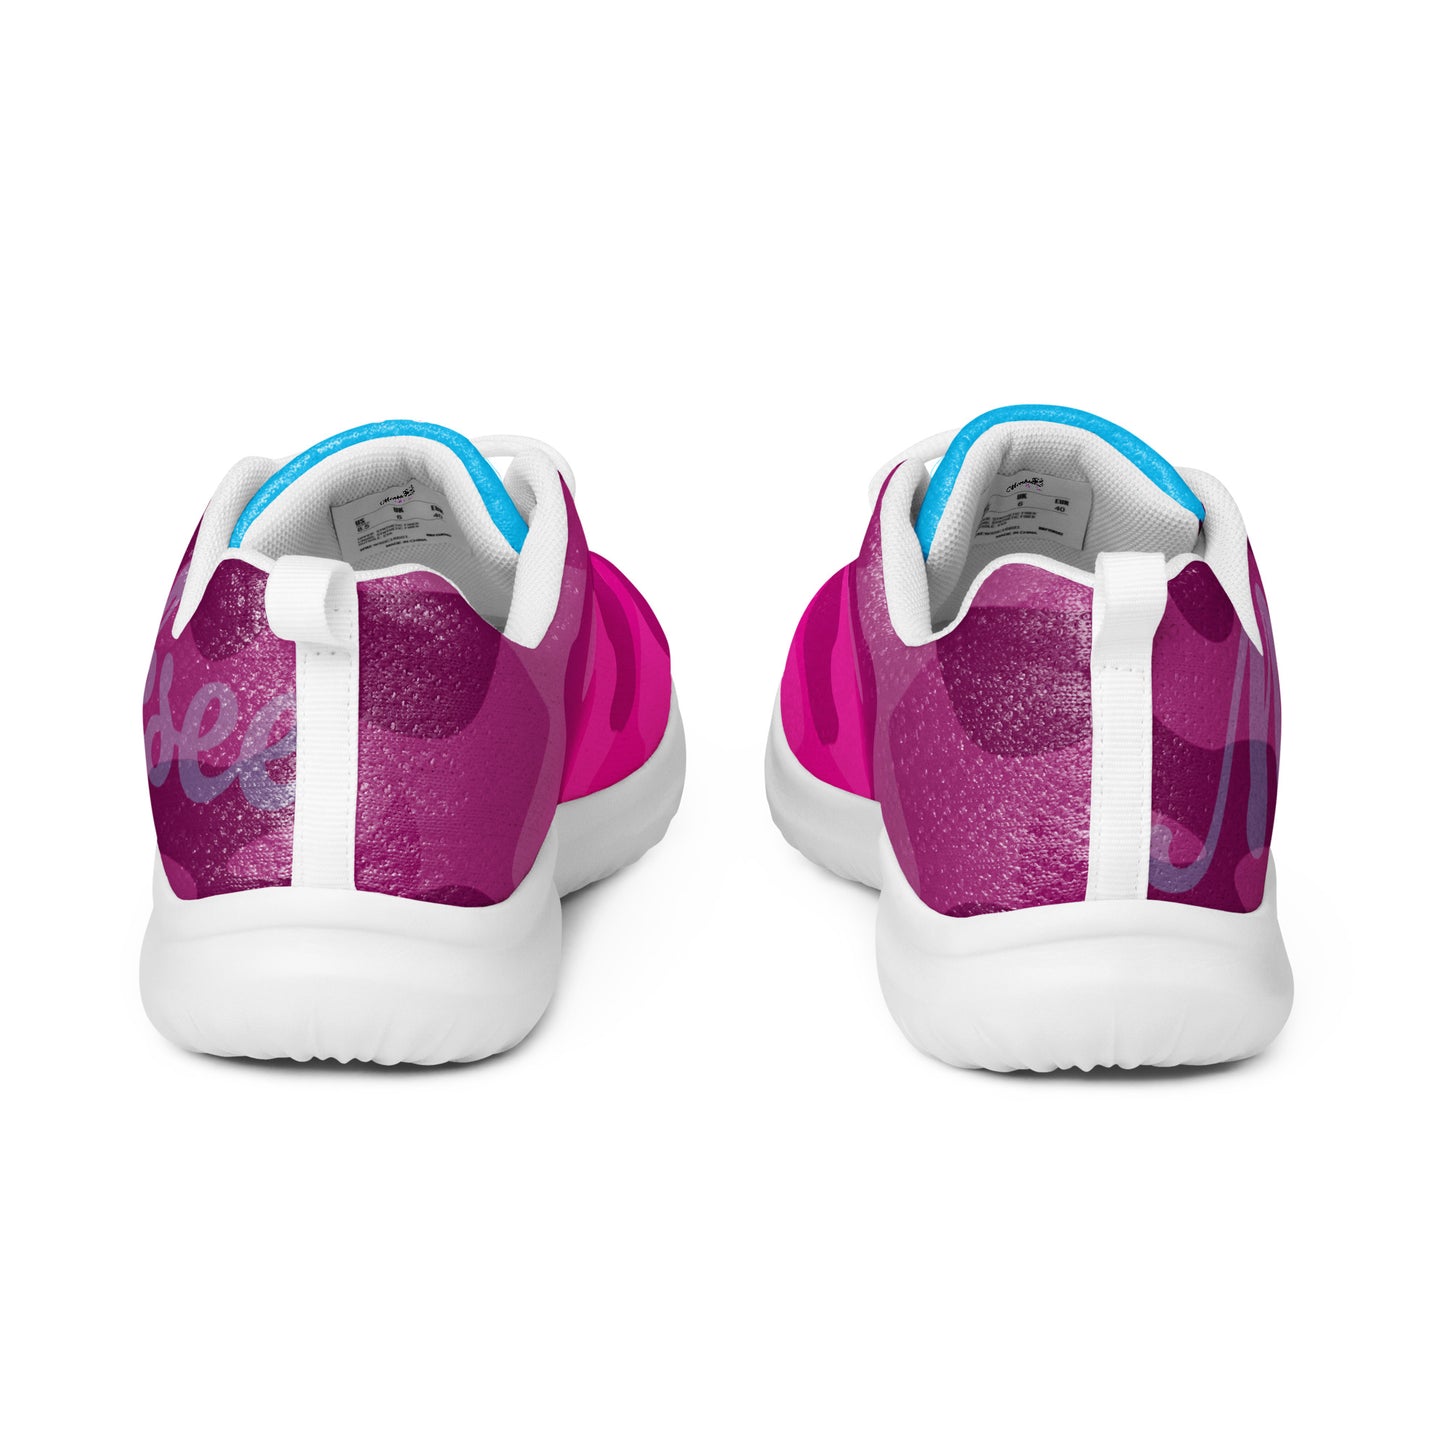 Move Girl - Womens trainers.